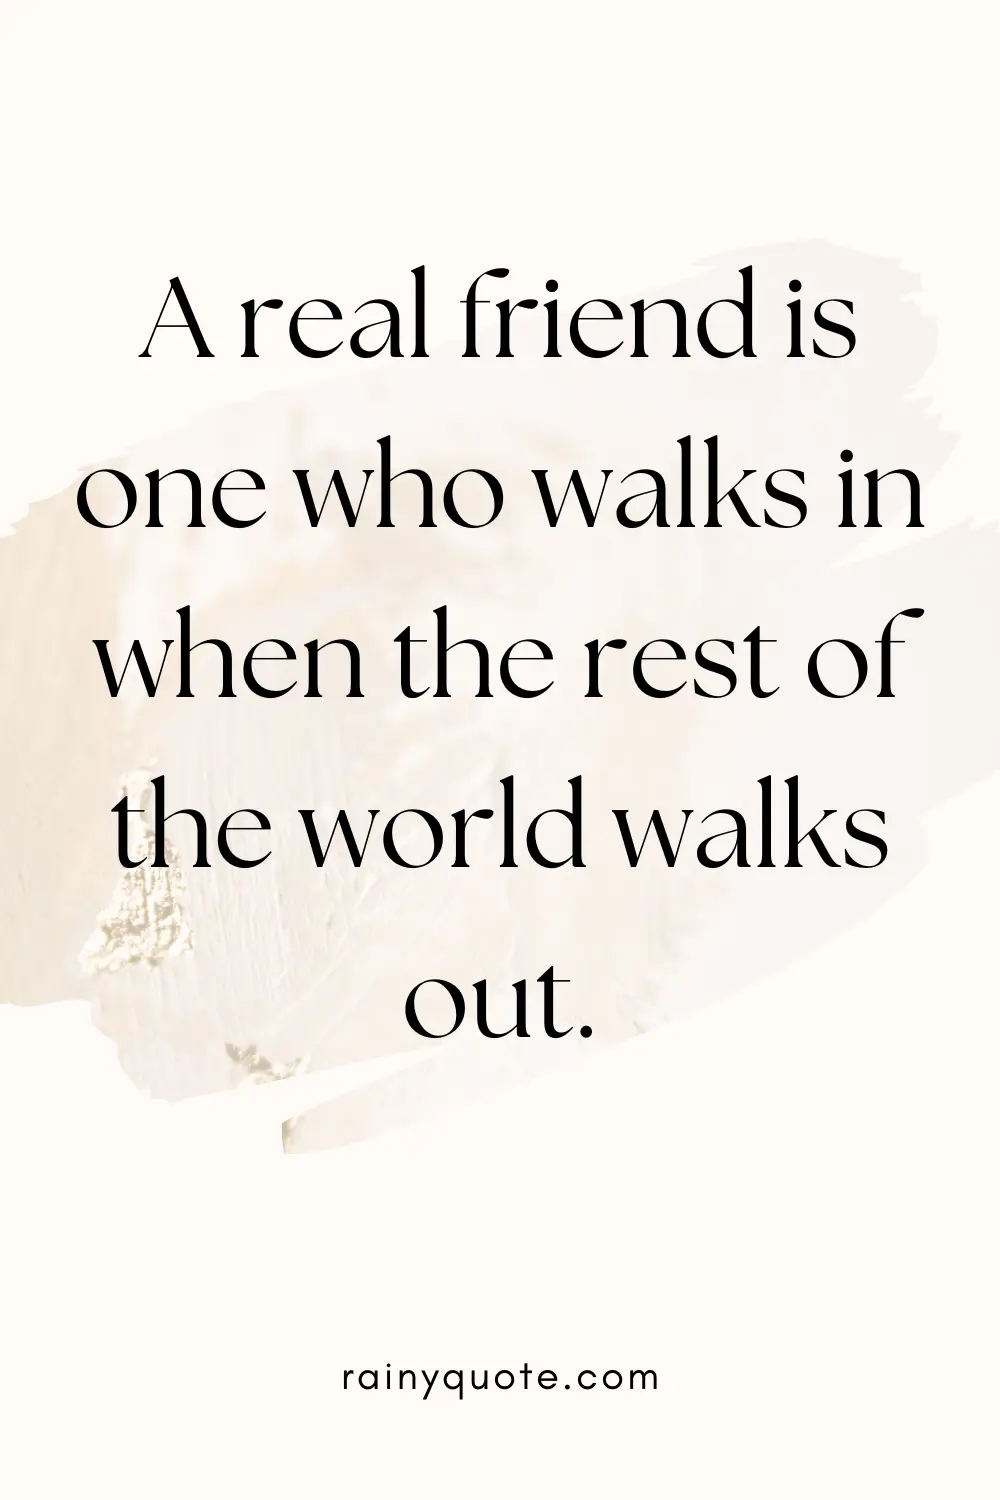 Unexpected Friendship Quotes (12)